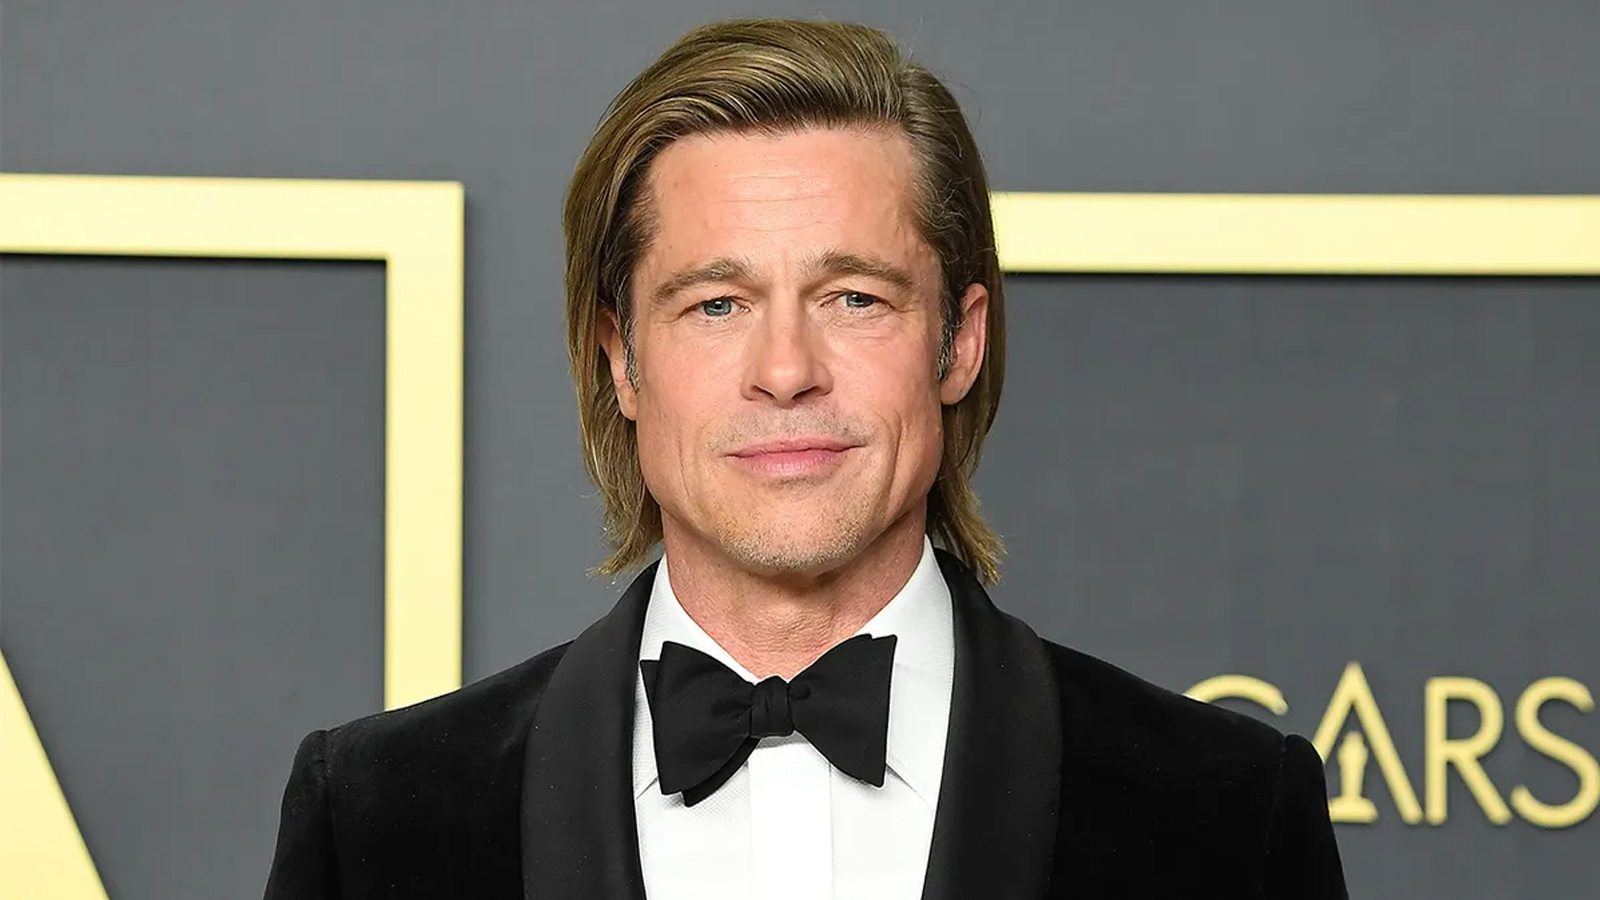 Brad Pitt Just Launched His New Gin, 'The Gardener' - DMARGE